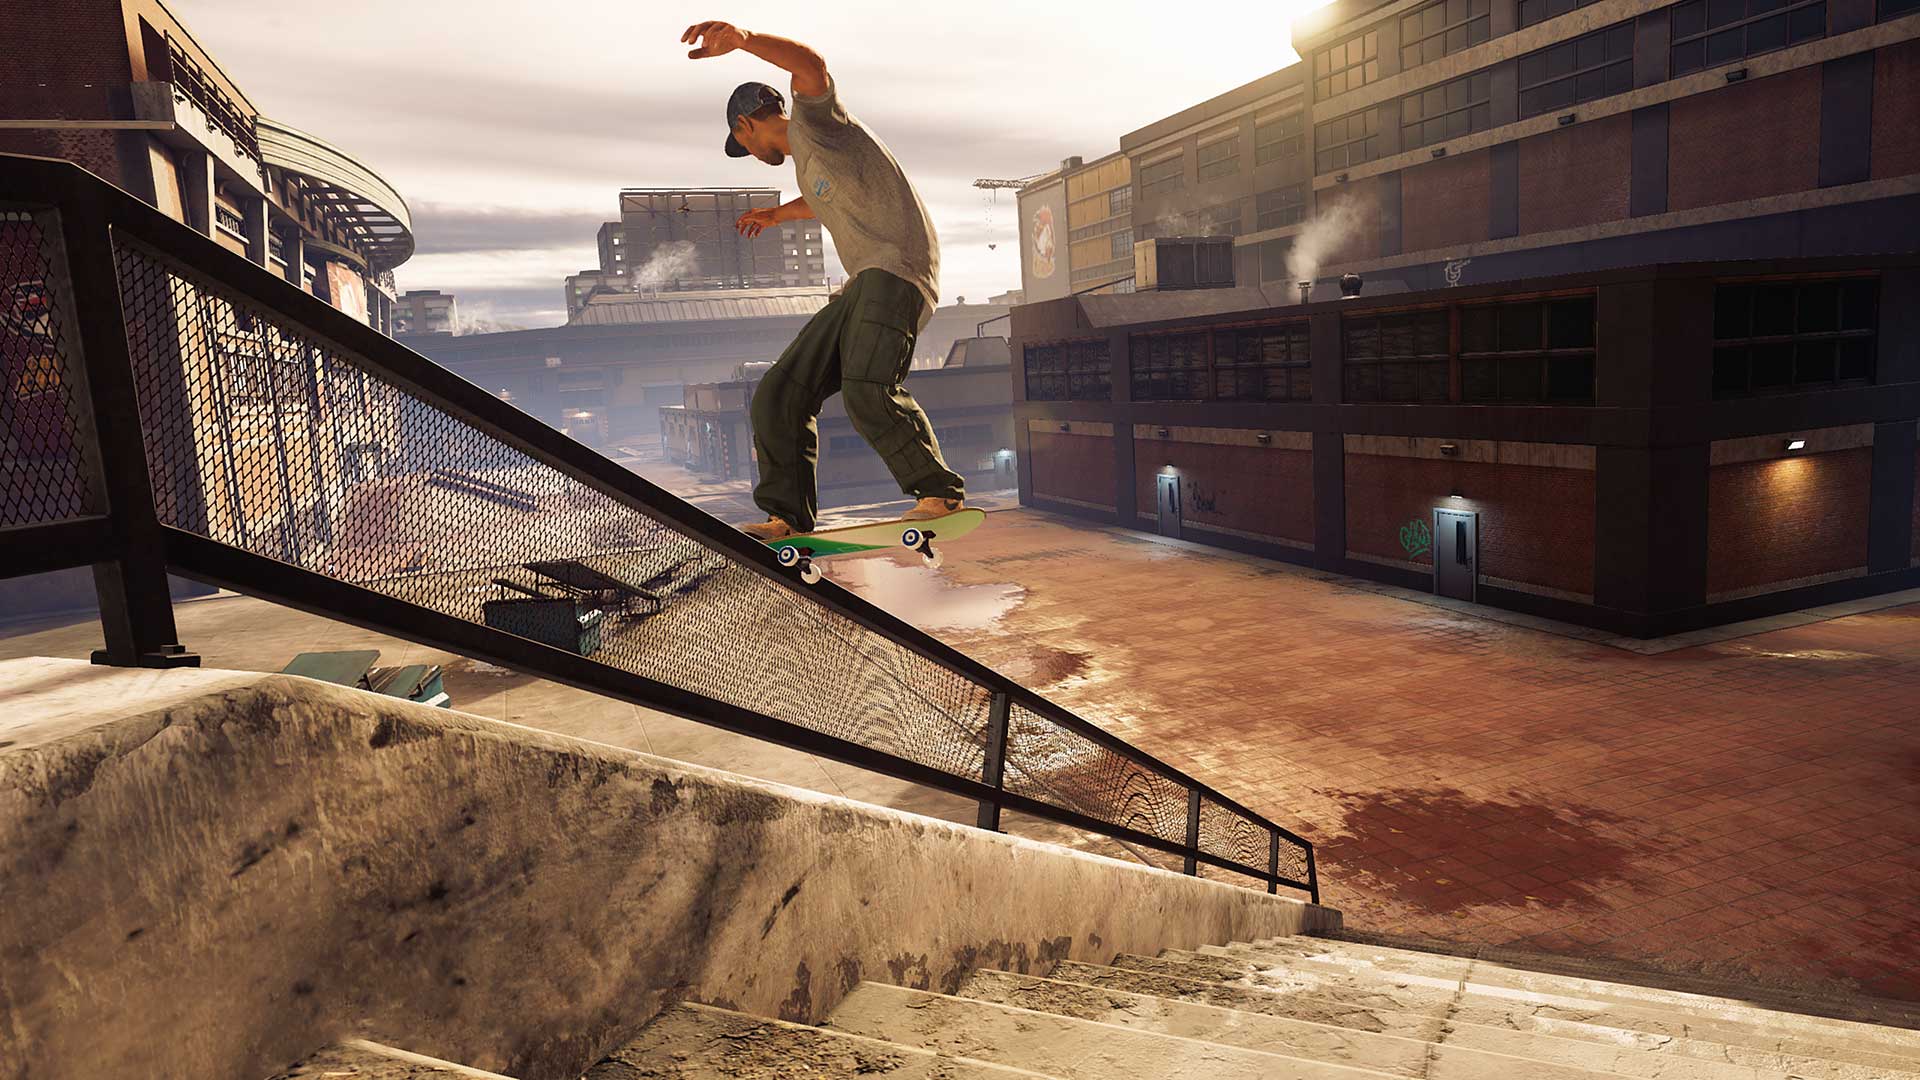 Tony Hawk's Pro Skater 1 + 2 Review (Switch)